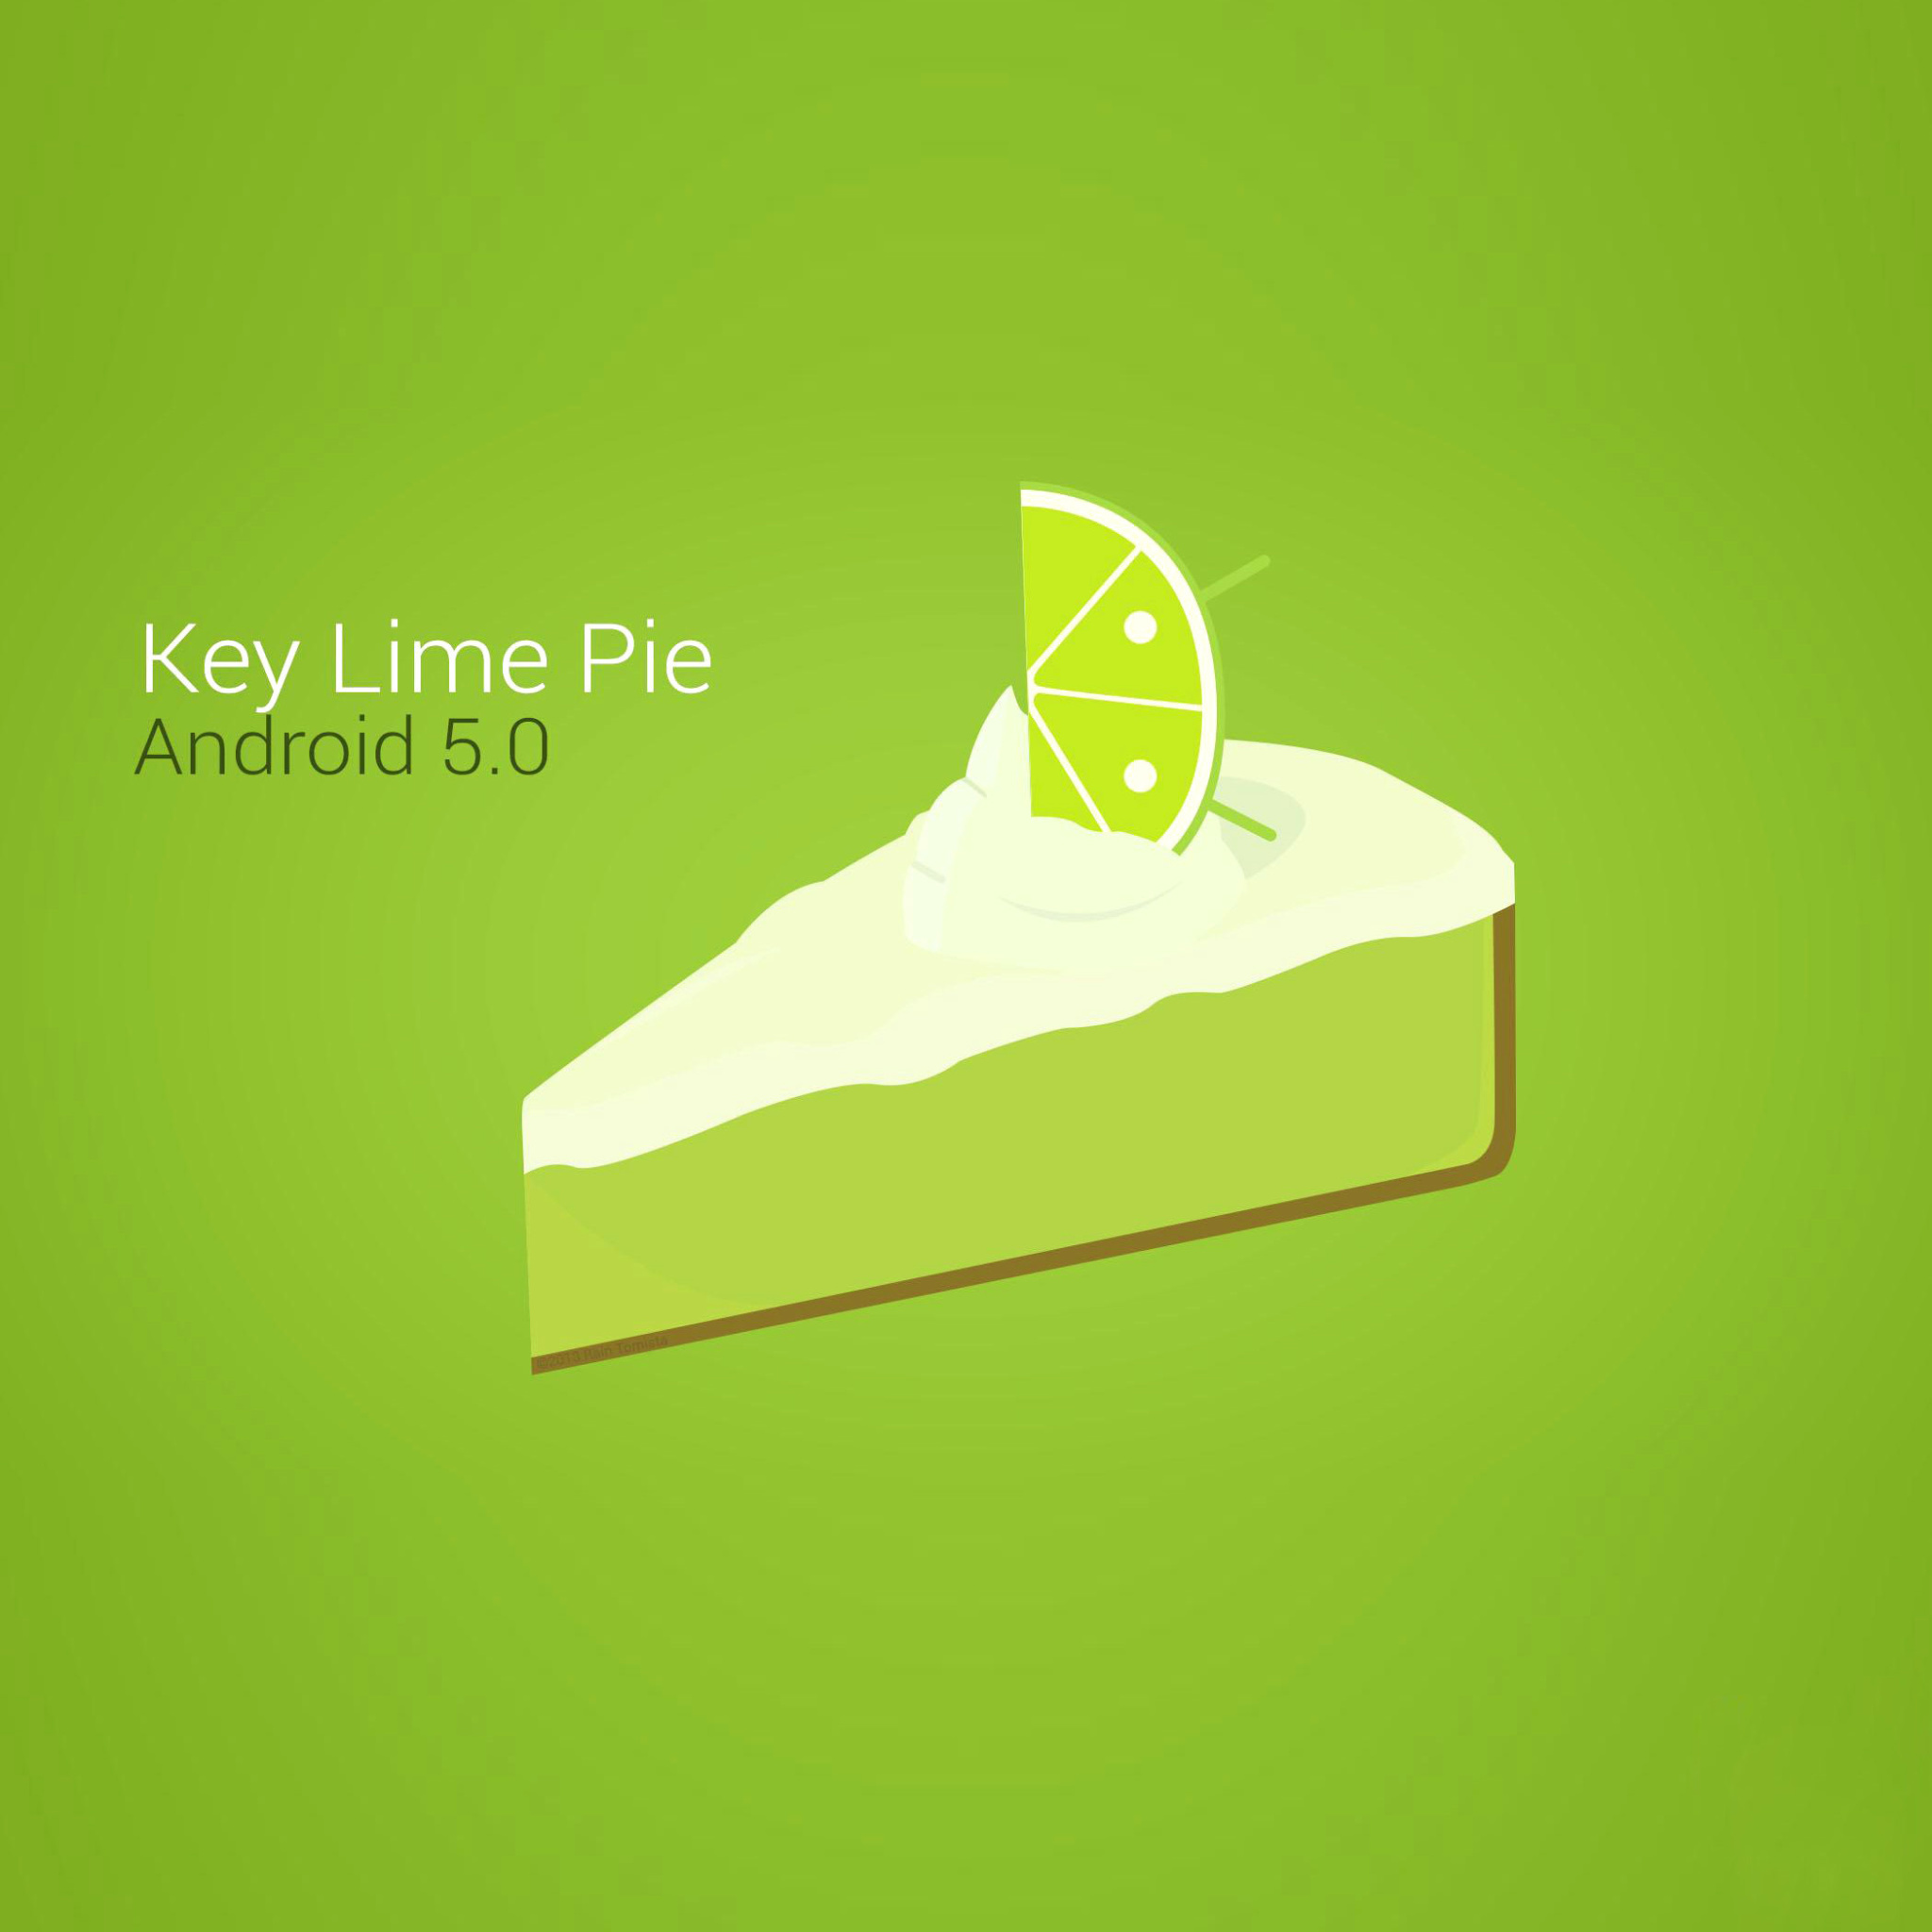 Concept Android 5.0 Key Lime Pie screenshot #1 2048x2048